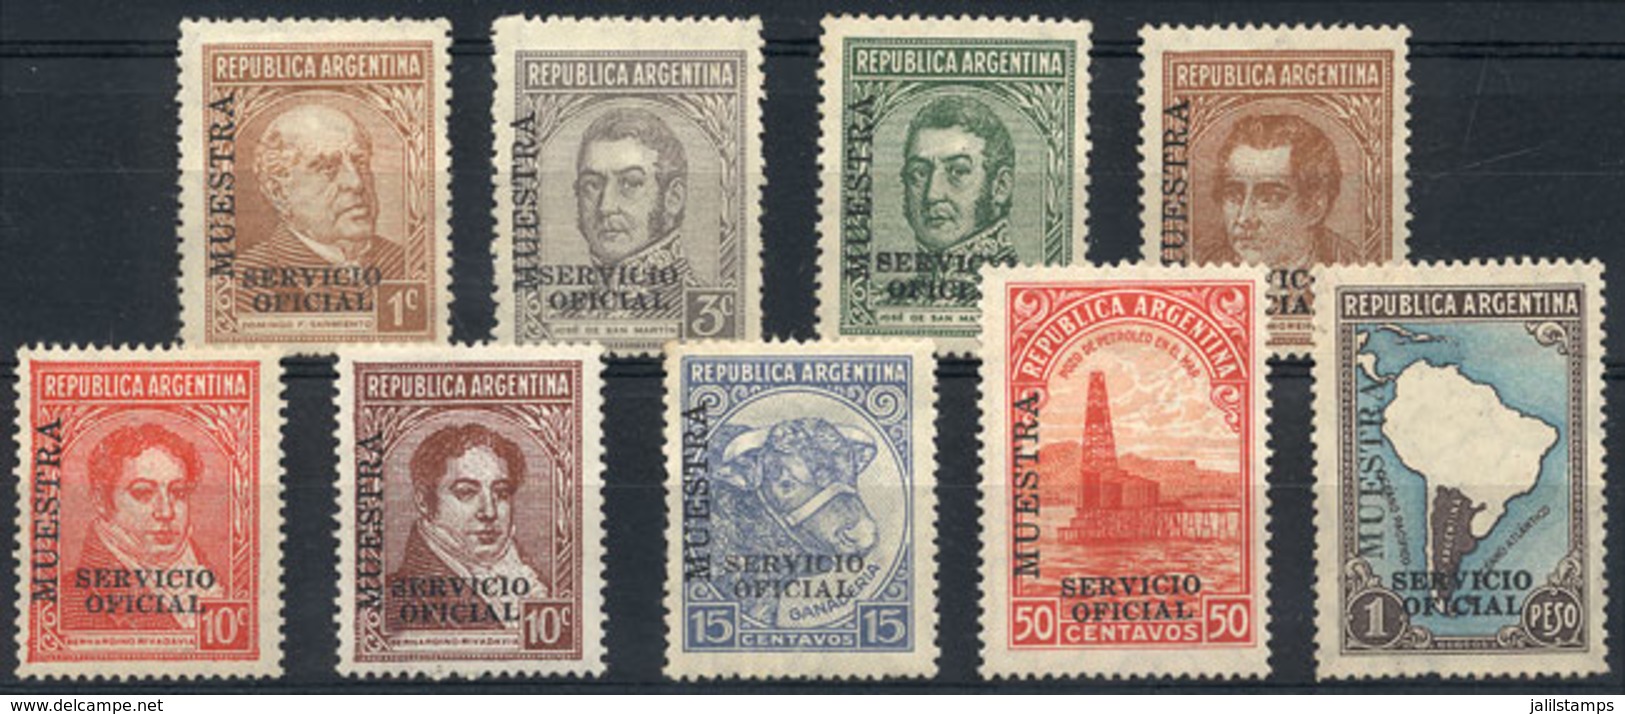 ARGENTINA: GJ.630 + Other Values, 9 Stamps Of The Proceres & Riquezas I Issue With MUESTRA Ovpt, VF Quality, Rare! - Officials